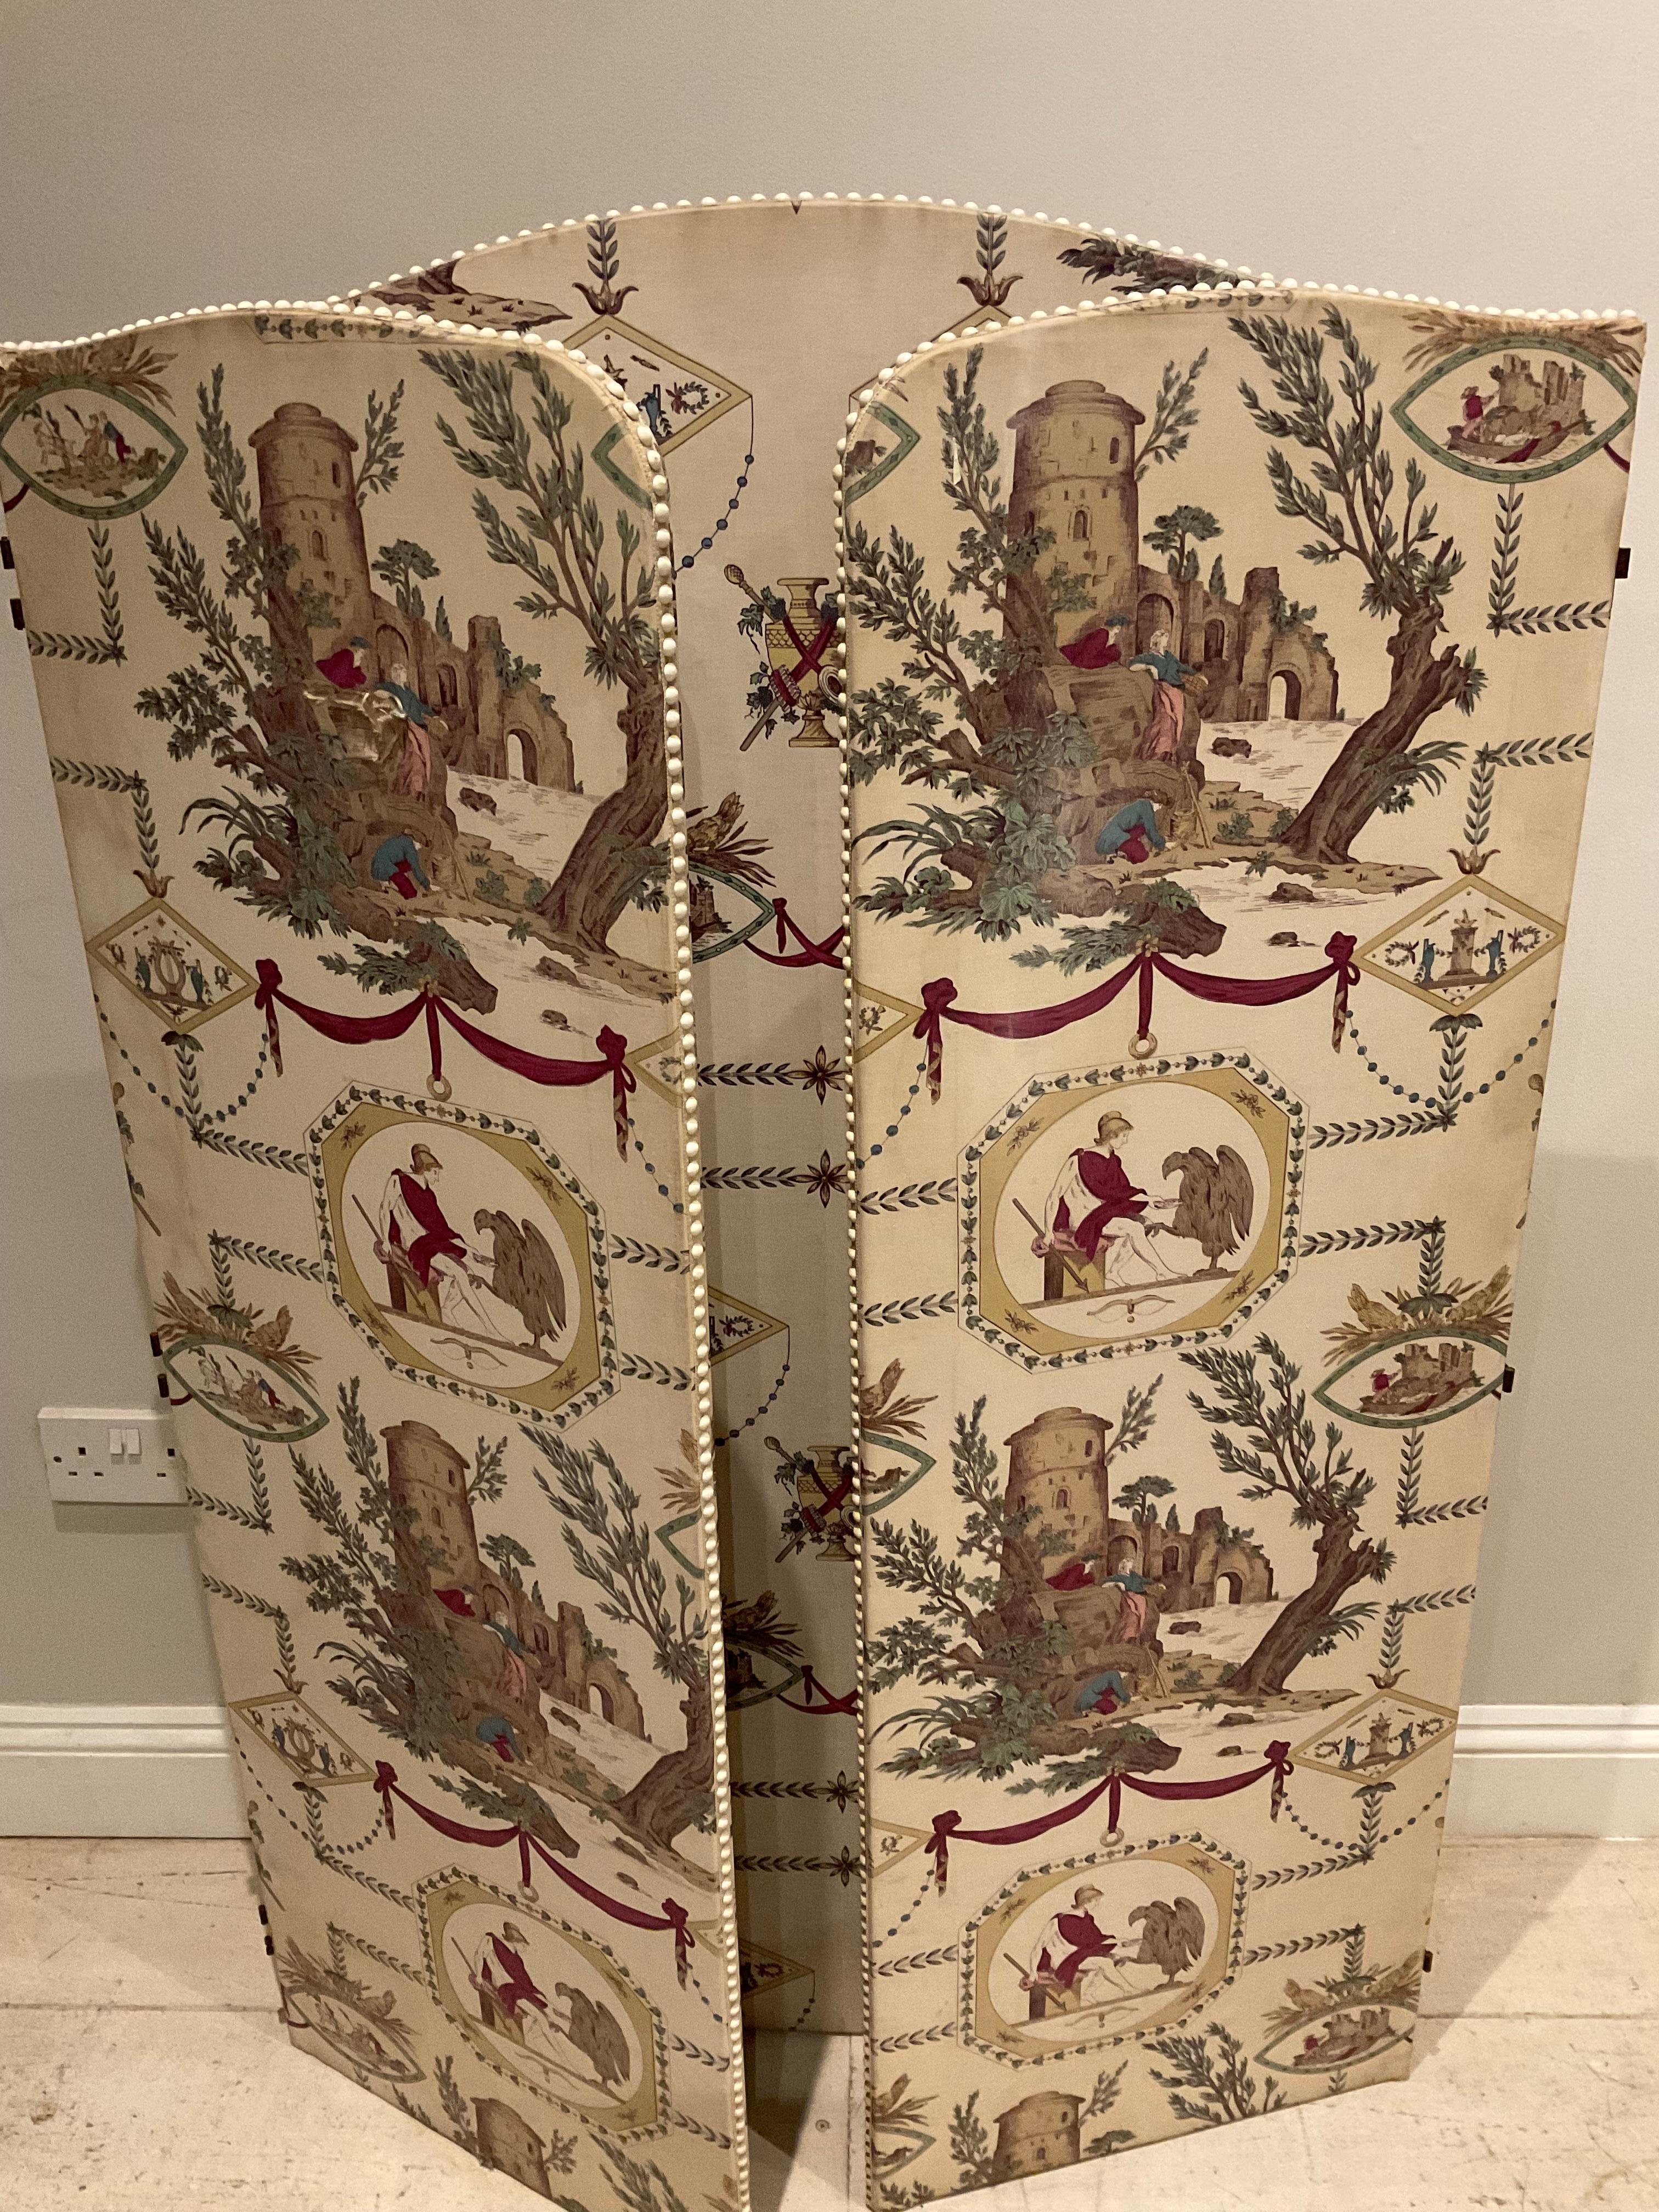 This circa 1940s/1950s French threefold screen is highly decorative versatile piece with two shorter panels sitting aside a wider fixed one.

The screen has fabric on both sides with off white studded edges and can easily free stand. It would also